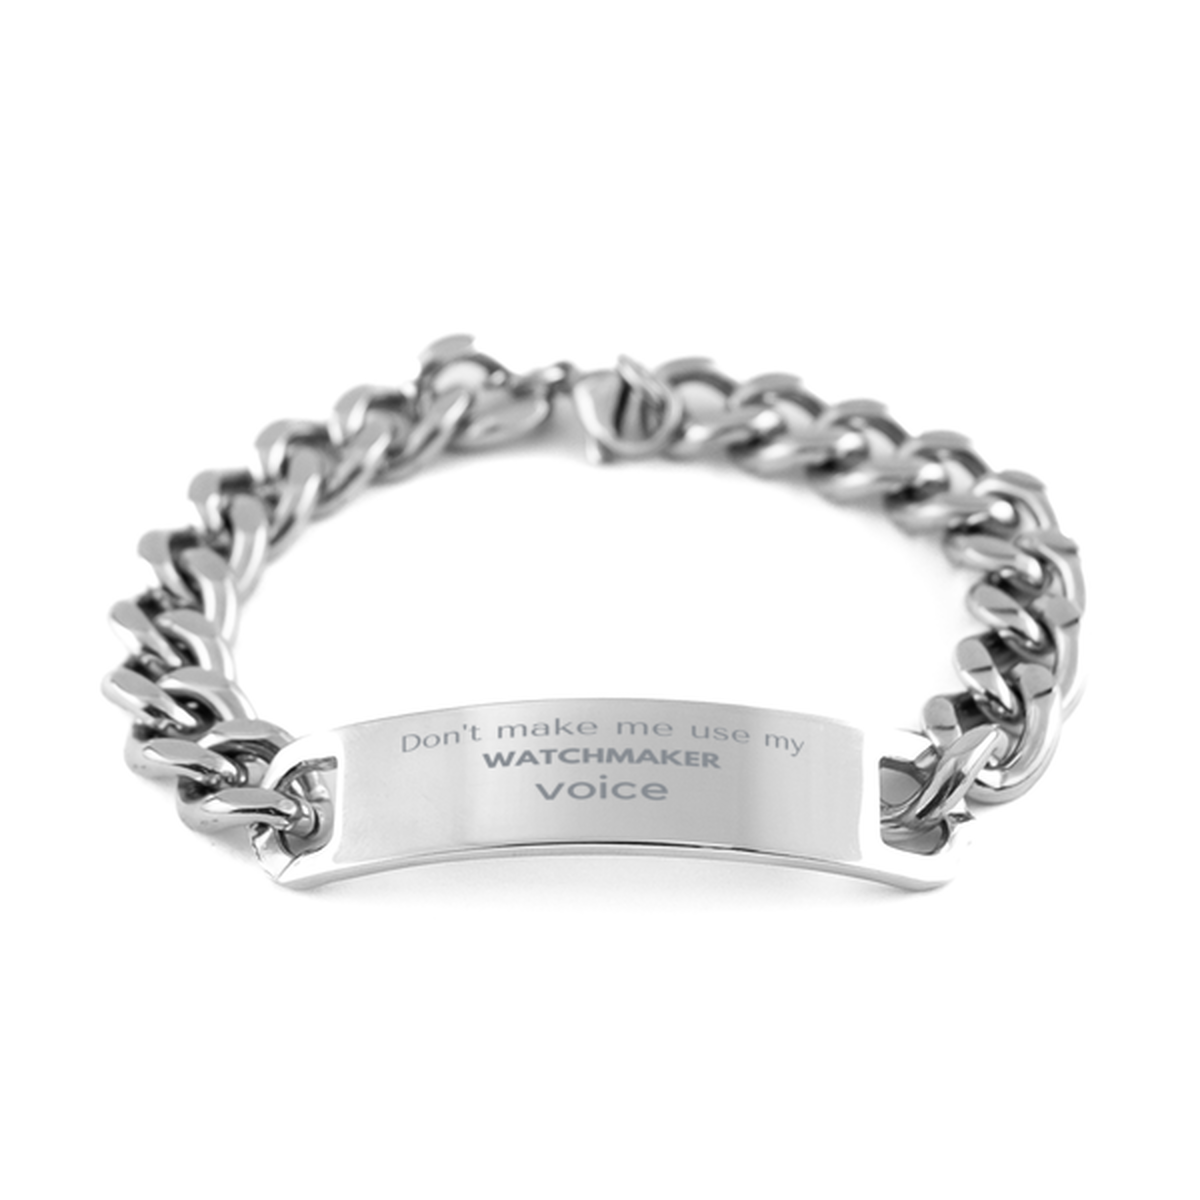 Don't make me use my Watchmaker voice, Sarcasm Watchmaker Gifts, Christmas Watchmaker Cuban Chain Stainless Steel Bracelet Birthday Unique Gifts For Watchmaker Coworkers, Men, Women, Colleague, Friends